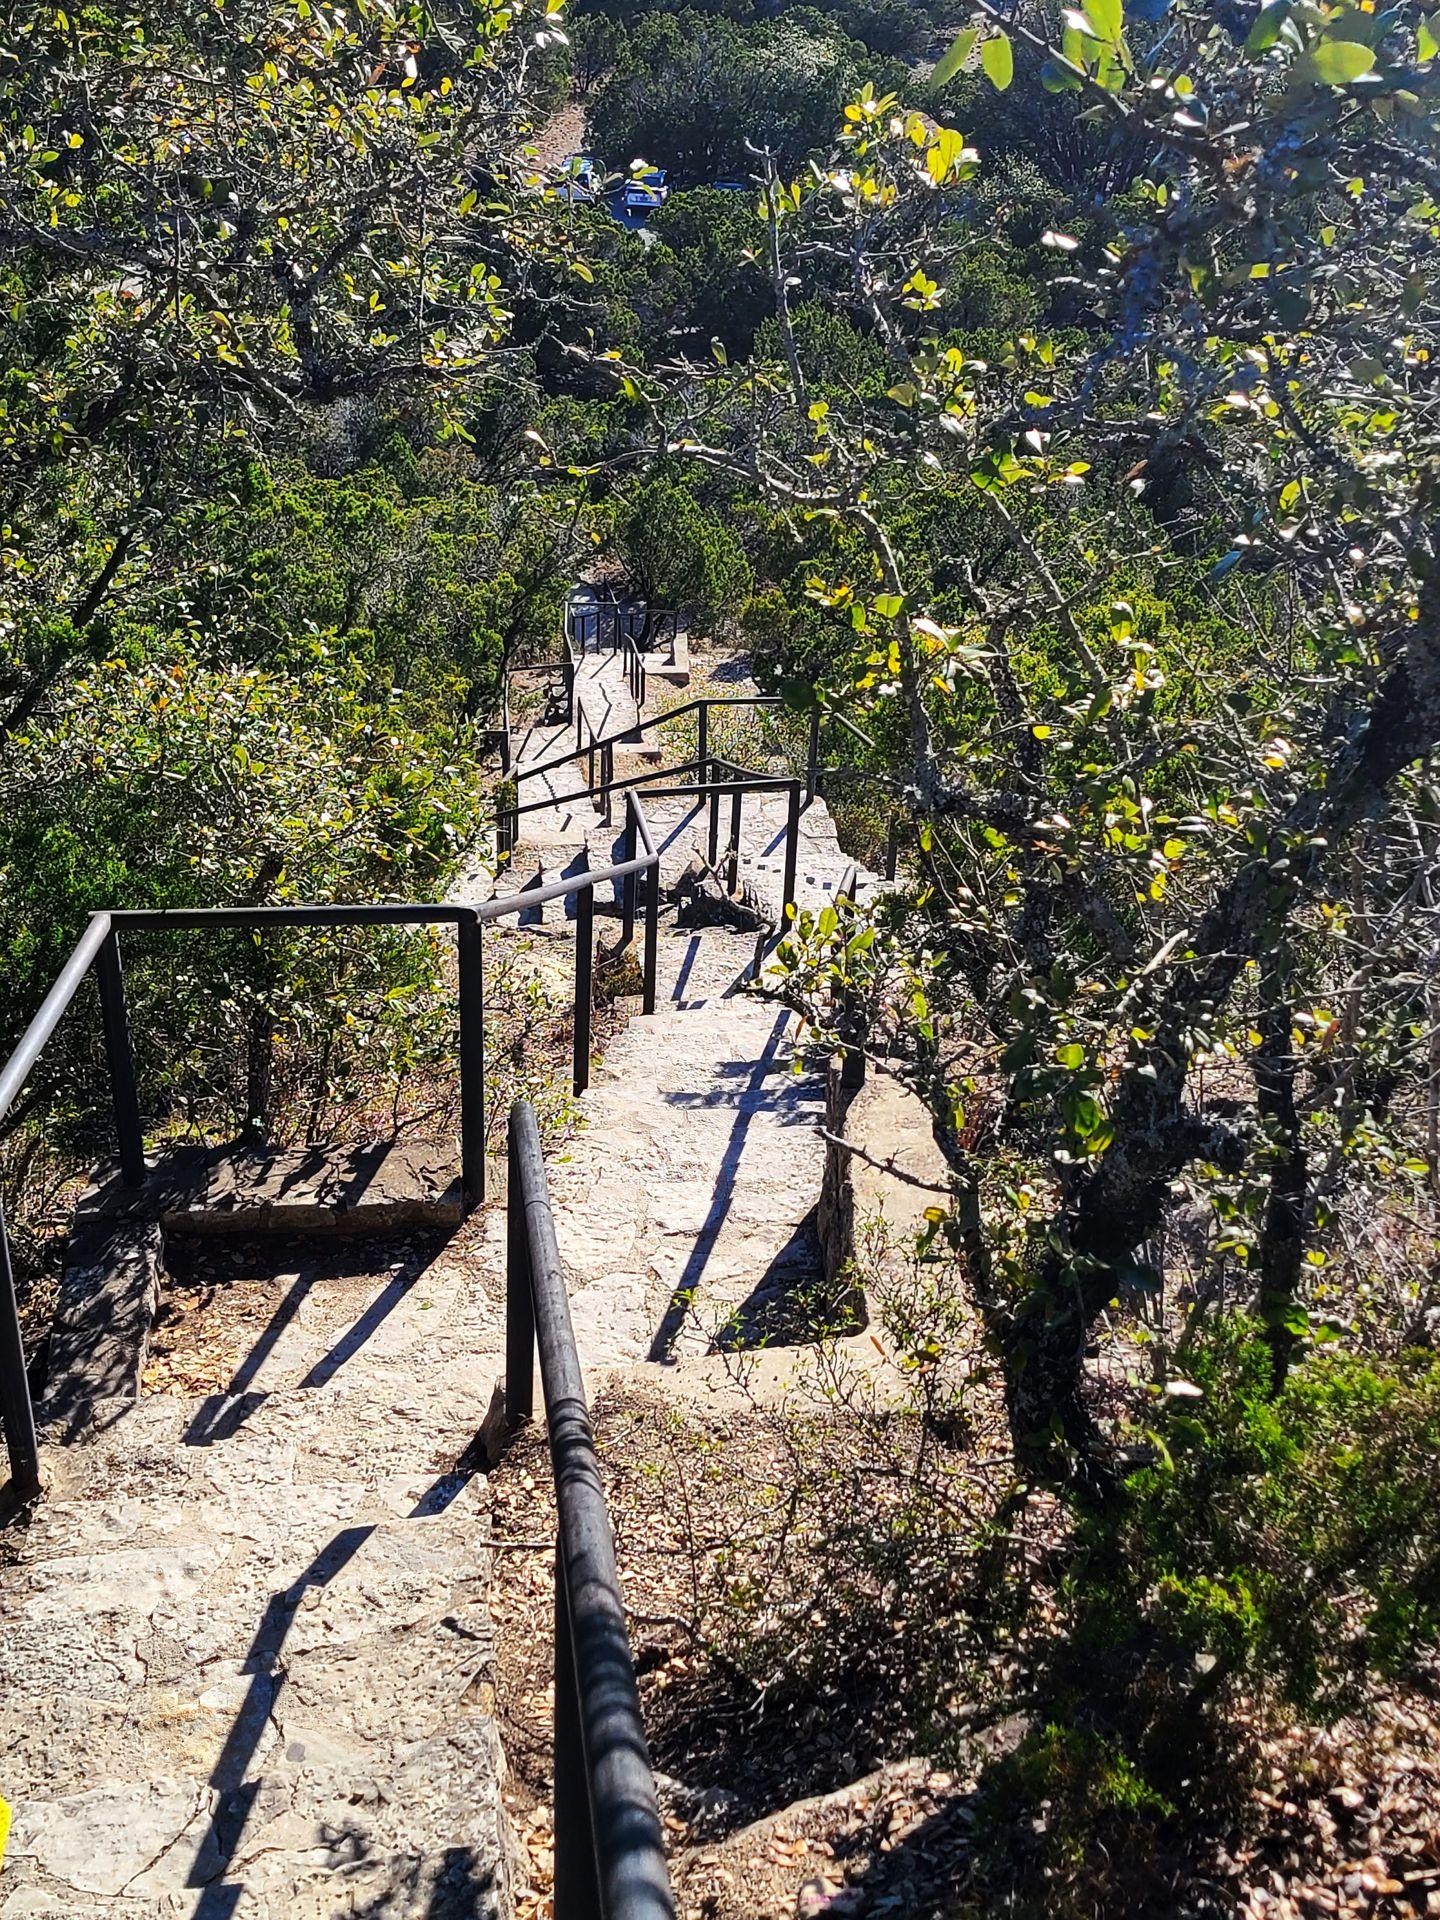 A staircase leading up to Old Baldy for views of Wimberley.